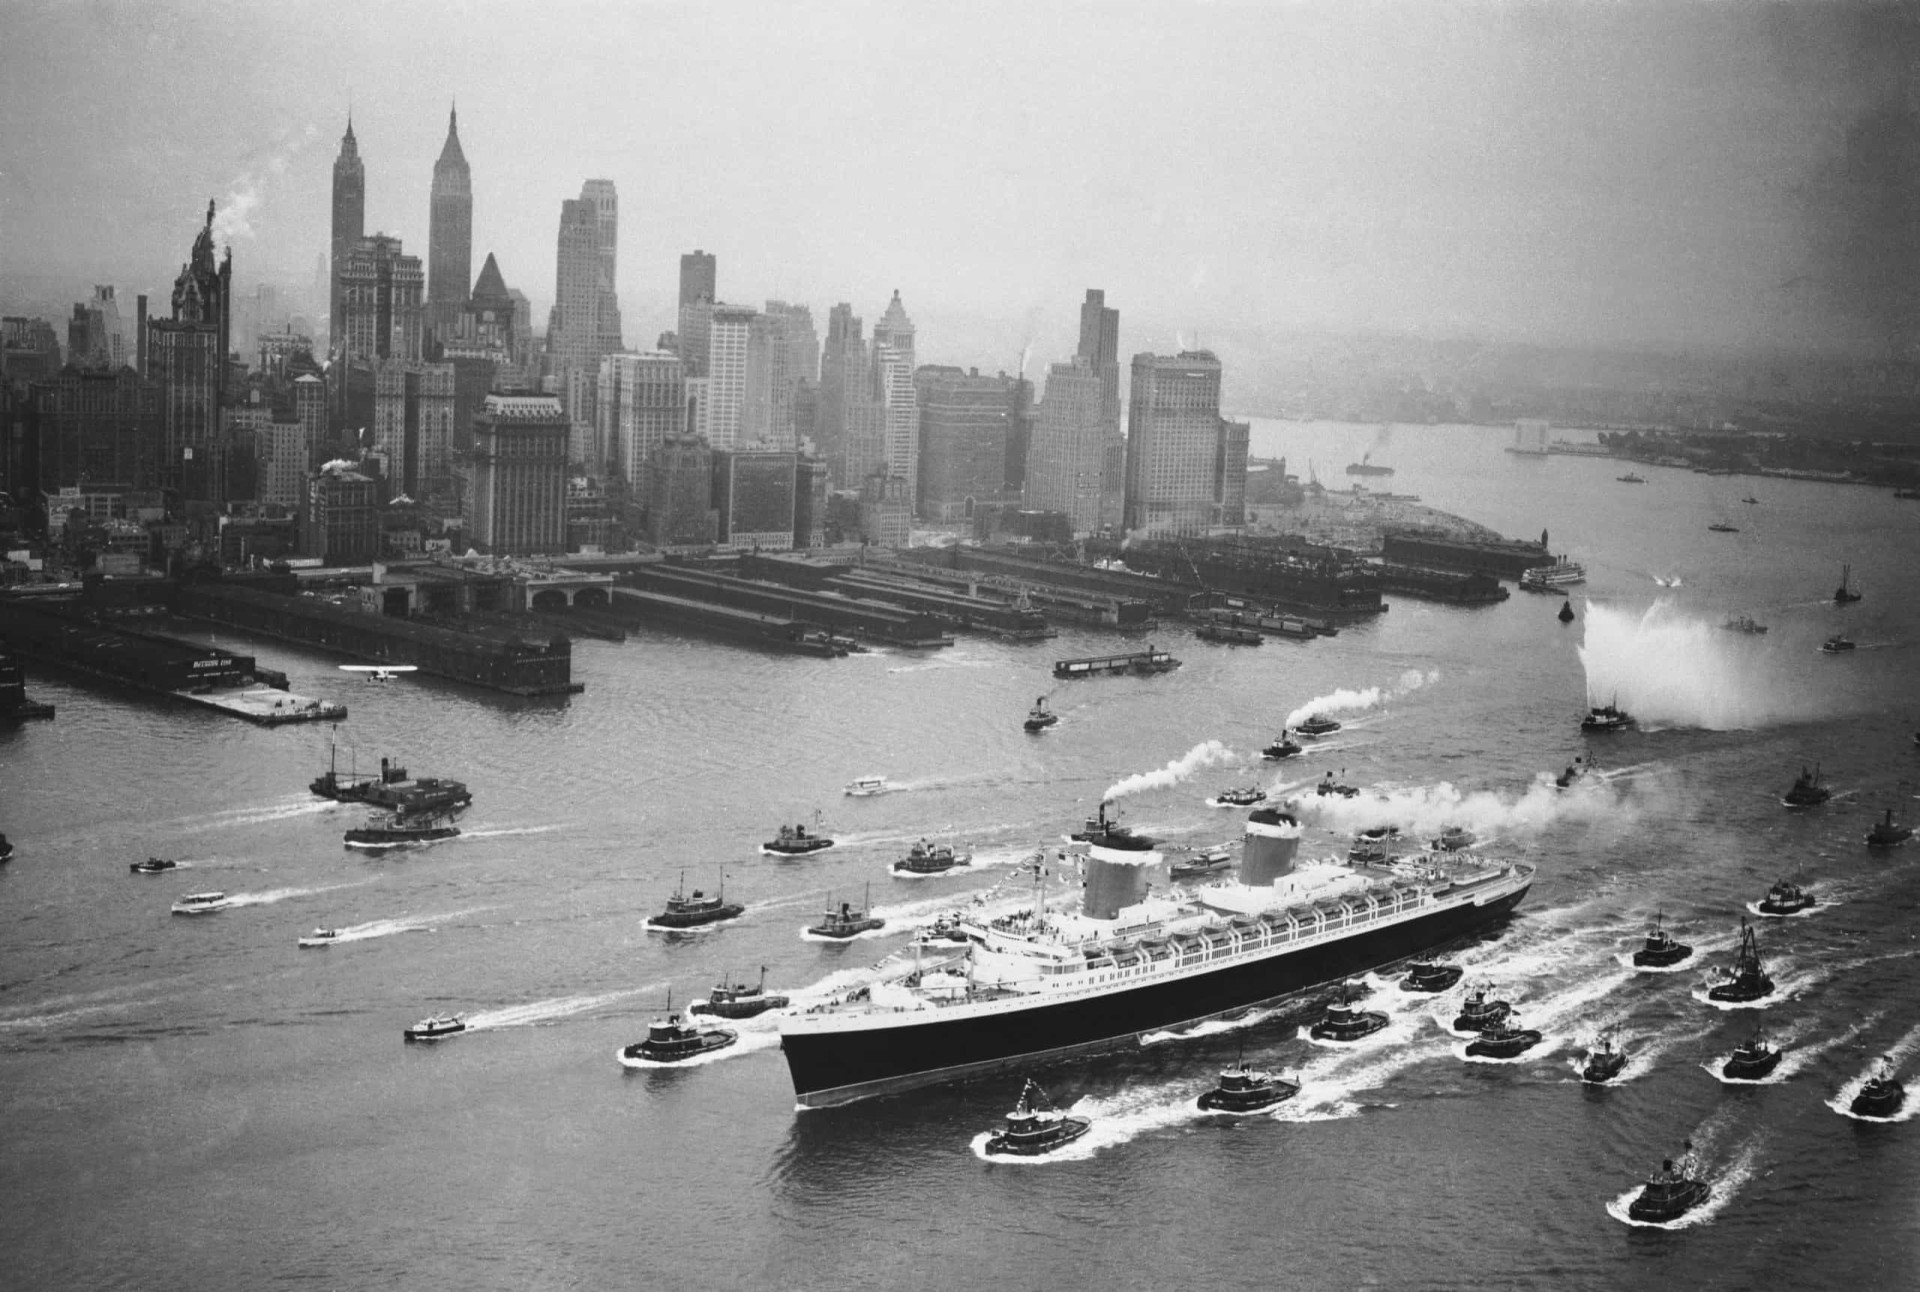 <p>The 1950s are generally regarded as the Golden Age of cruising. And the appeal of taking to water on a luxury ocean-going liner was not lost on the celebrities of the day.Pictured is the SS <em>United States</em>, flagship of the United States Lines, entering New York Harbor on June 23, 1952.</p><p>You may also like:<a href="https://www.starsinsider.com/n/443877?utm_source=msn.com&utm_medium=display&utm_campaign=referral_description&utm_content=502910v1en-ae"> Studio 54: What really happened at the iconic club</a></p>